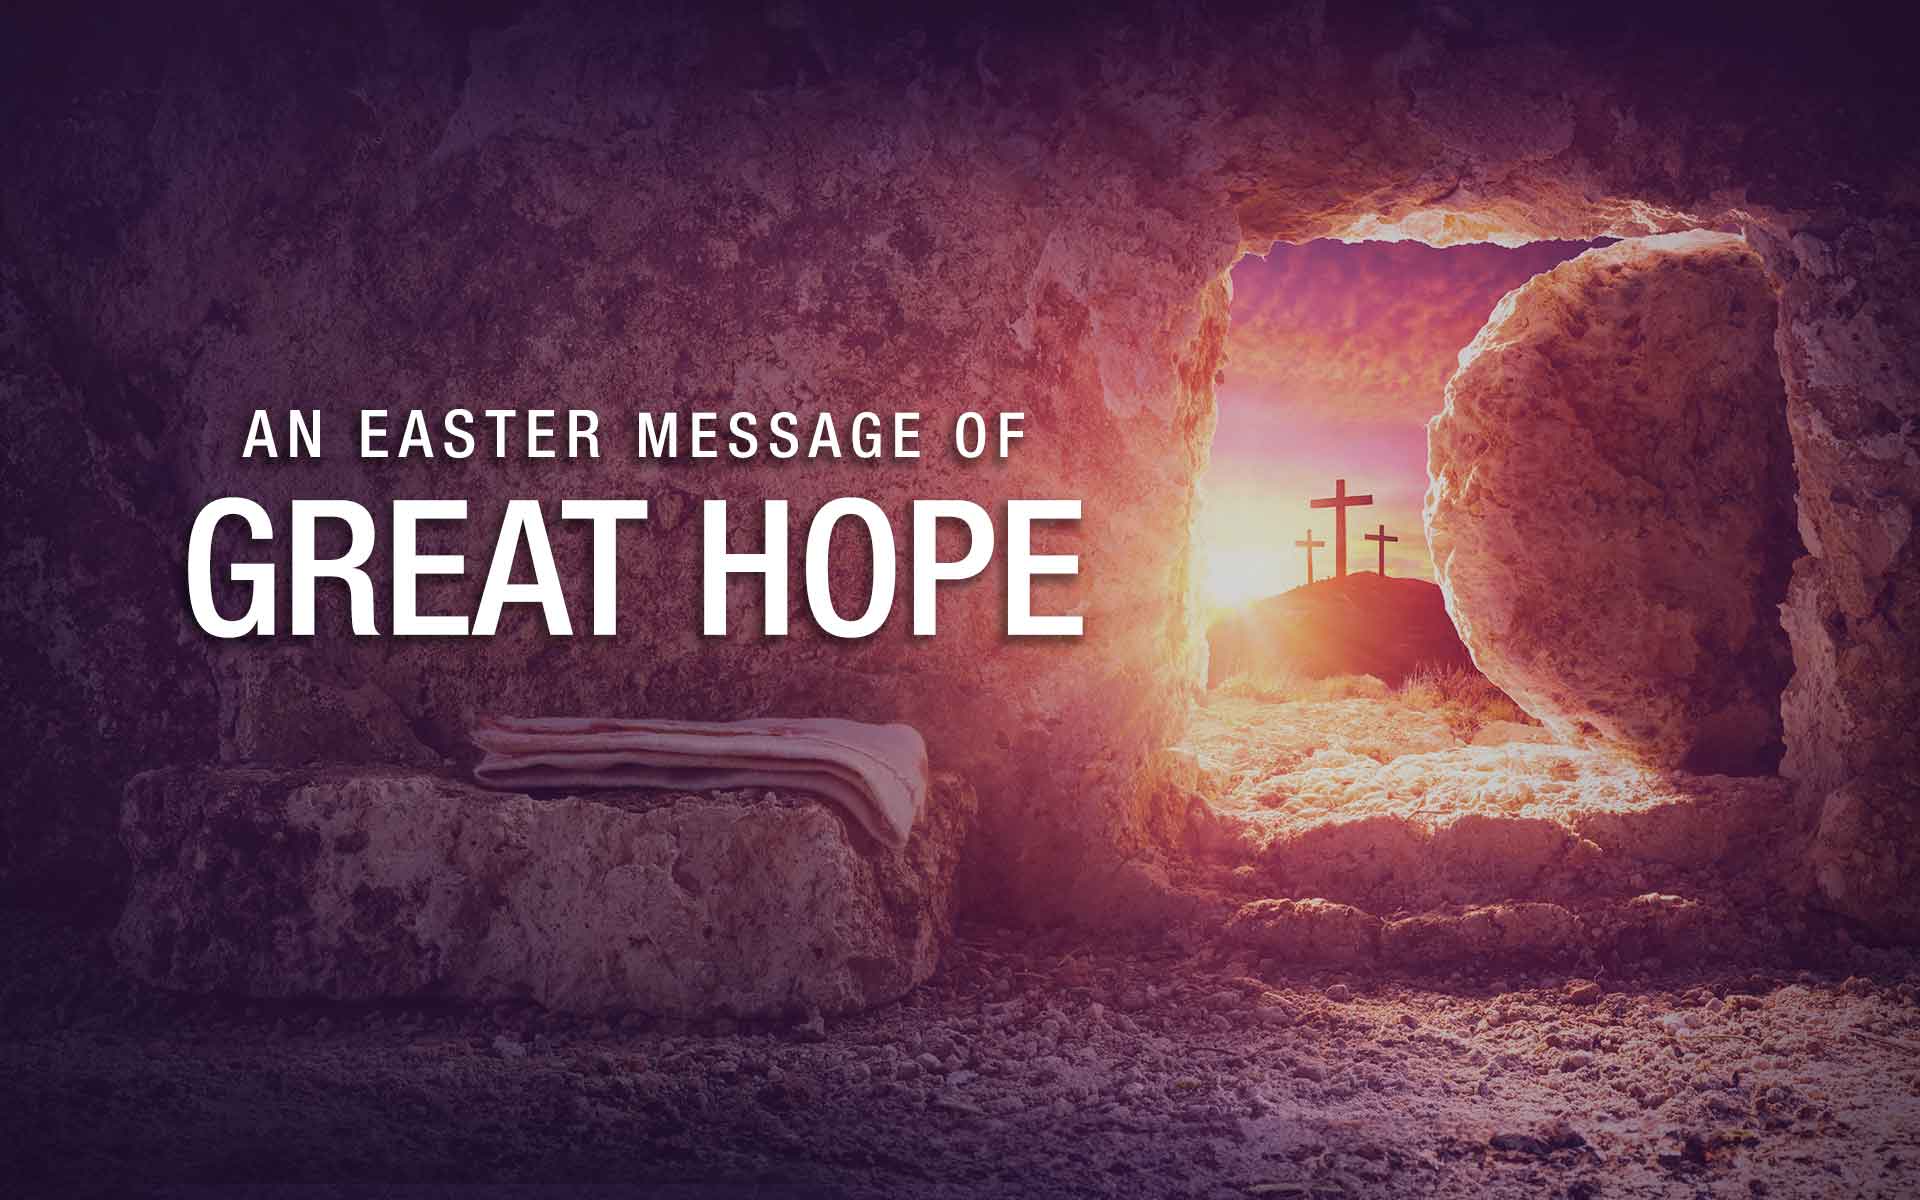 Dr. Dobson Shares An Easter Message of Great Hope